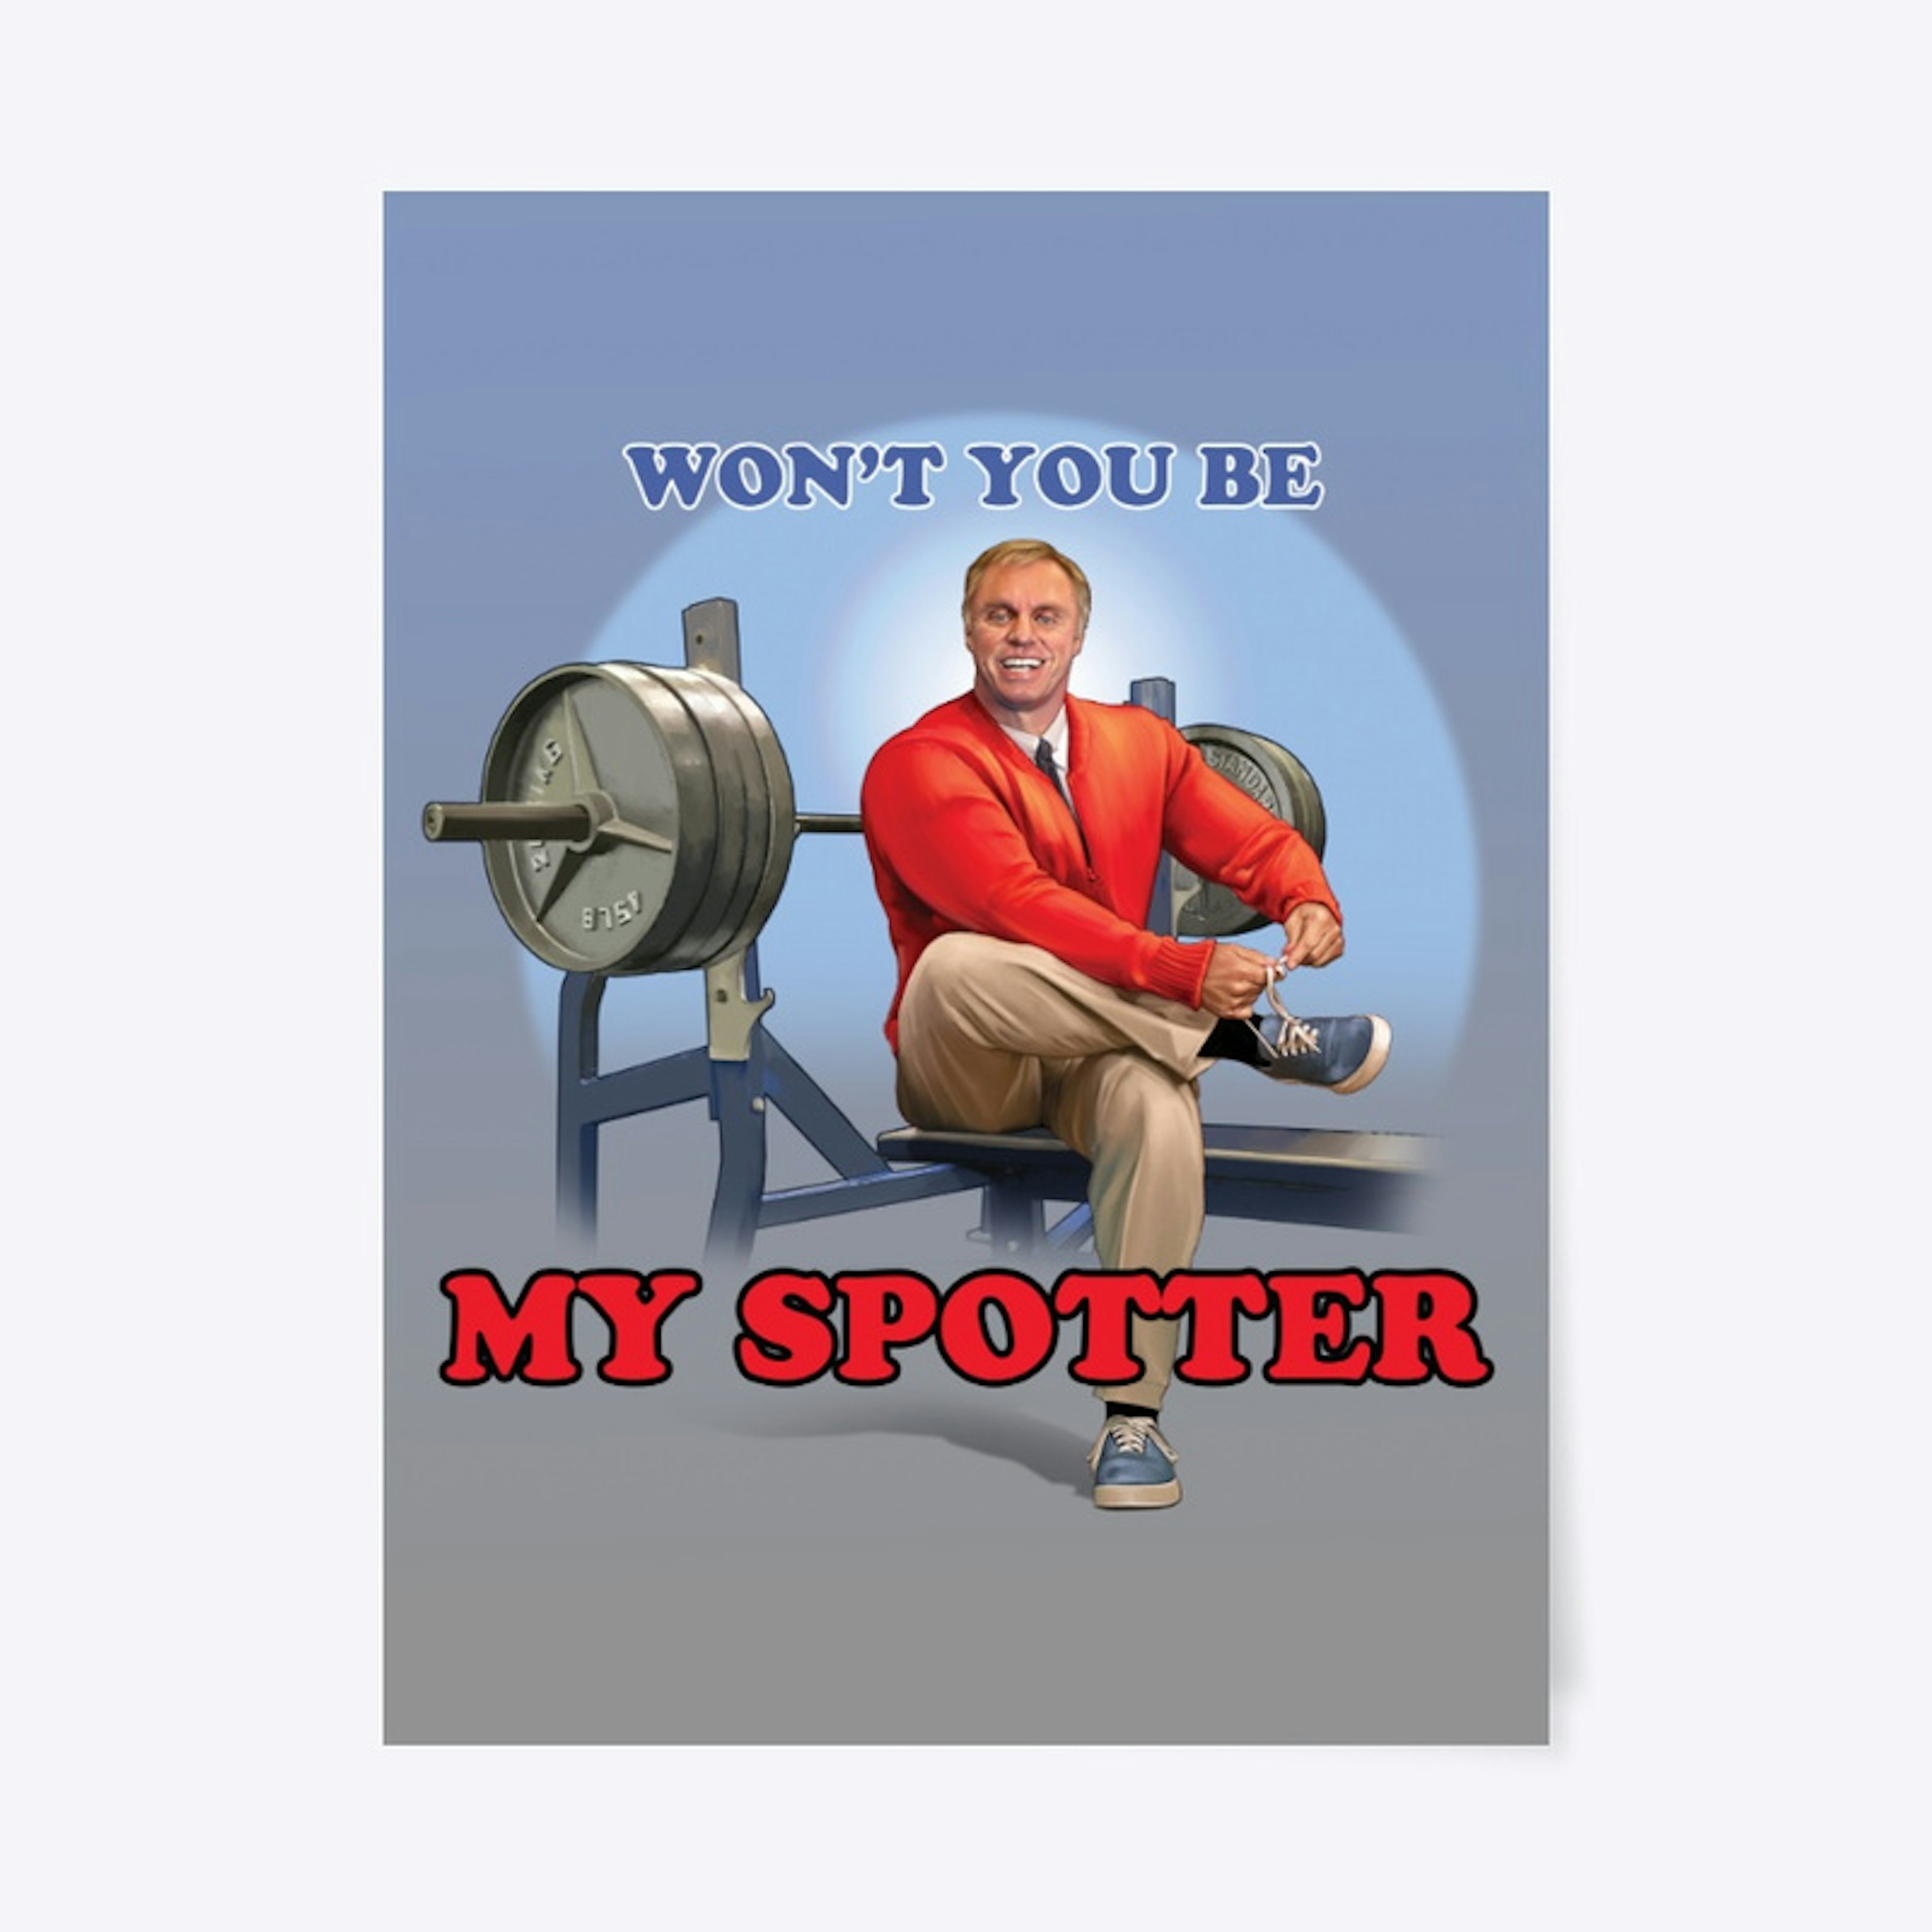 Won't you be my spotter poster